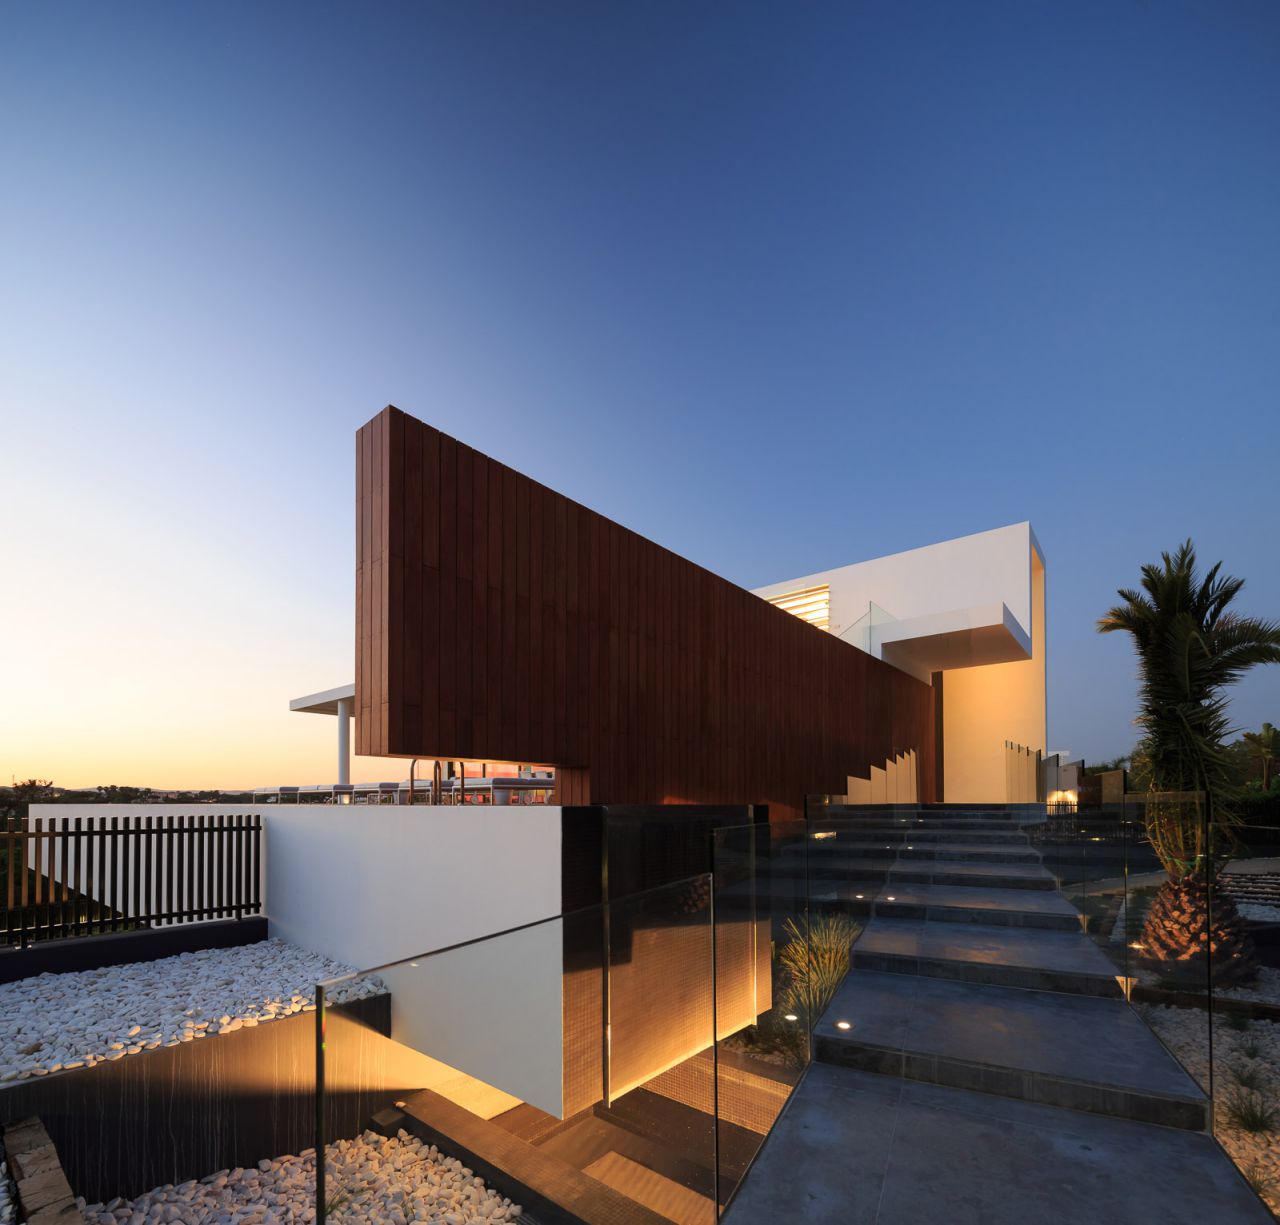 Casa-Marah-in-Portugal-by-Arquimais-Architecture-and-Design-24